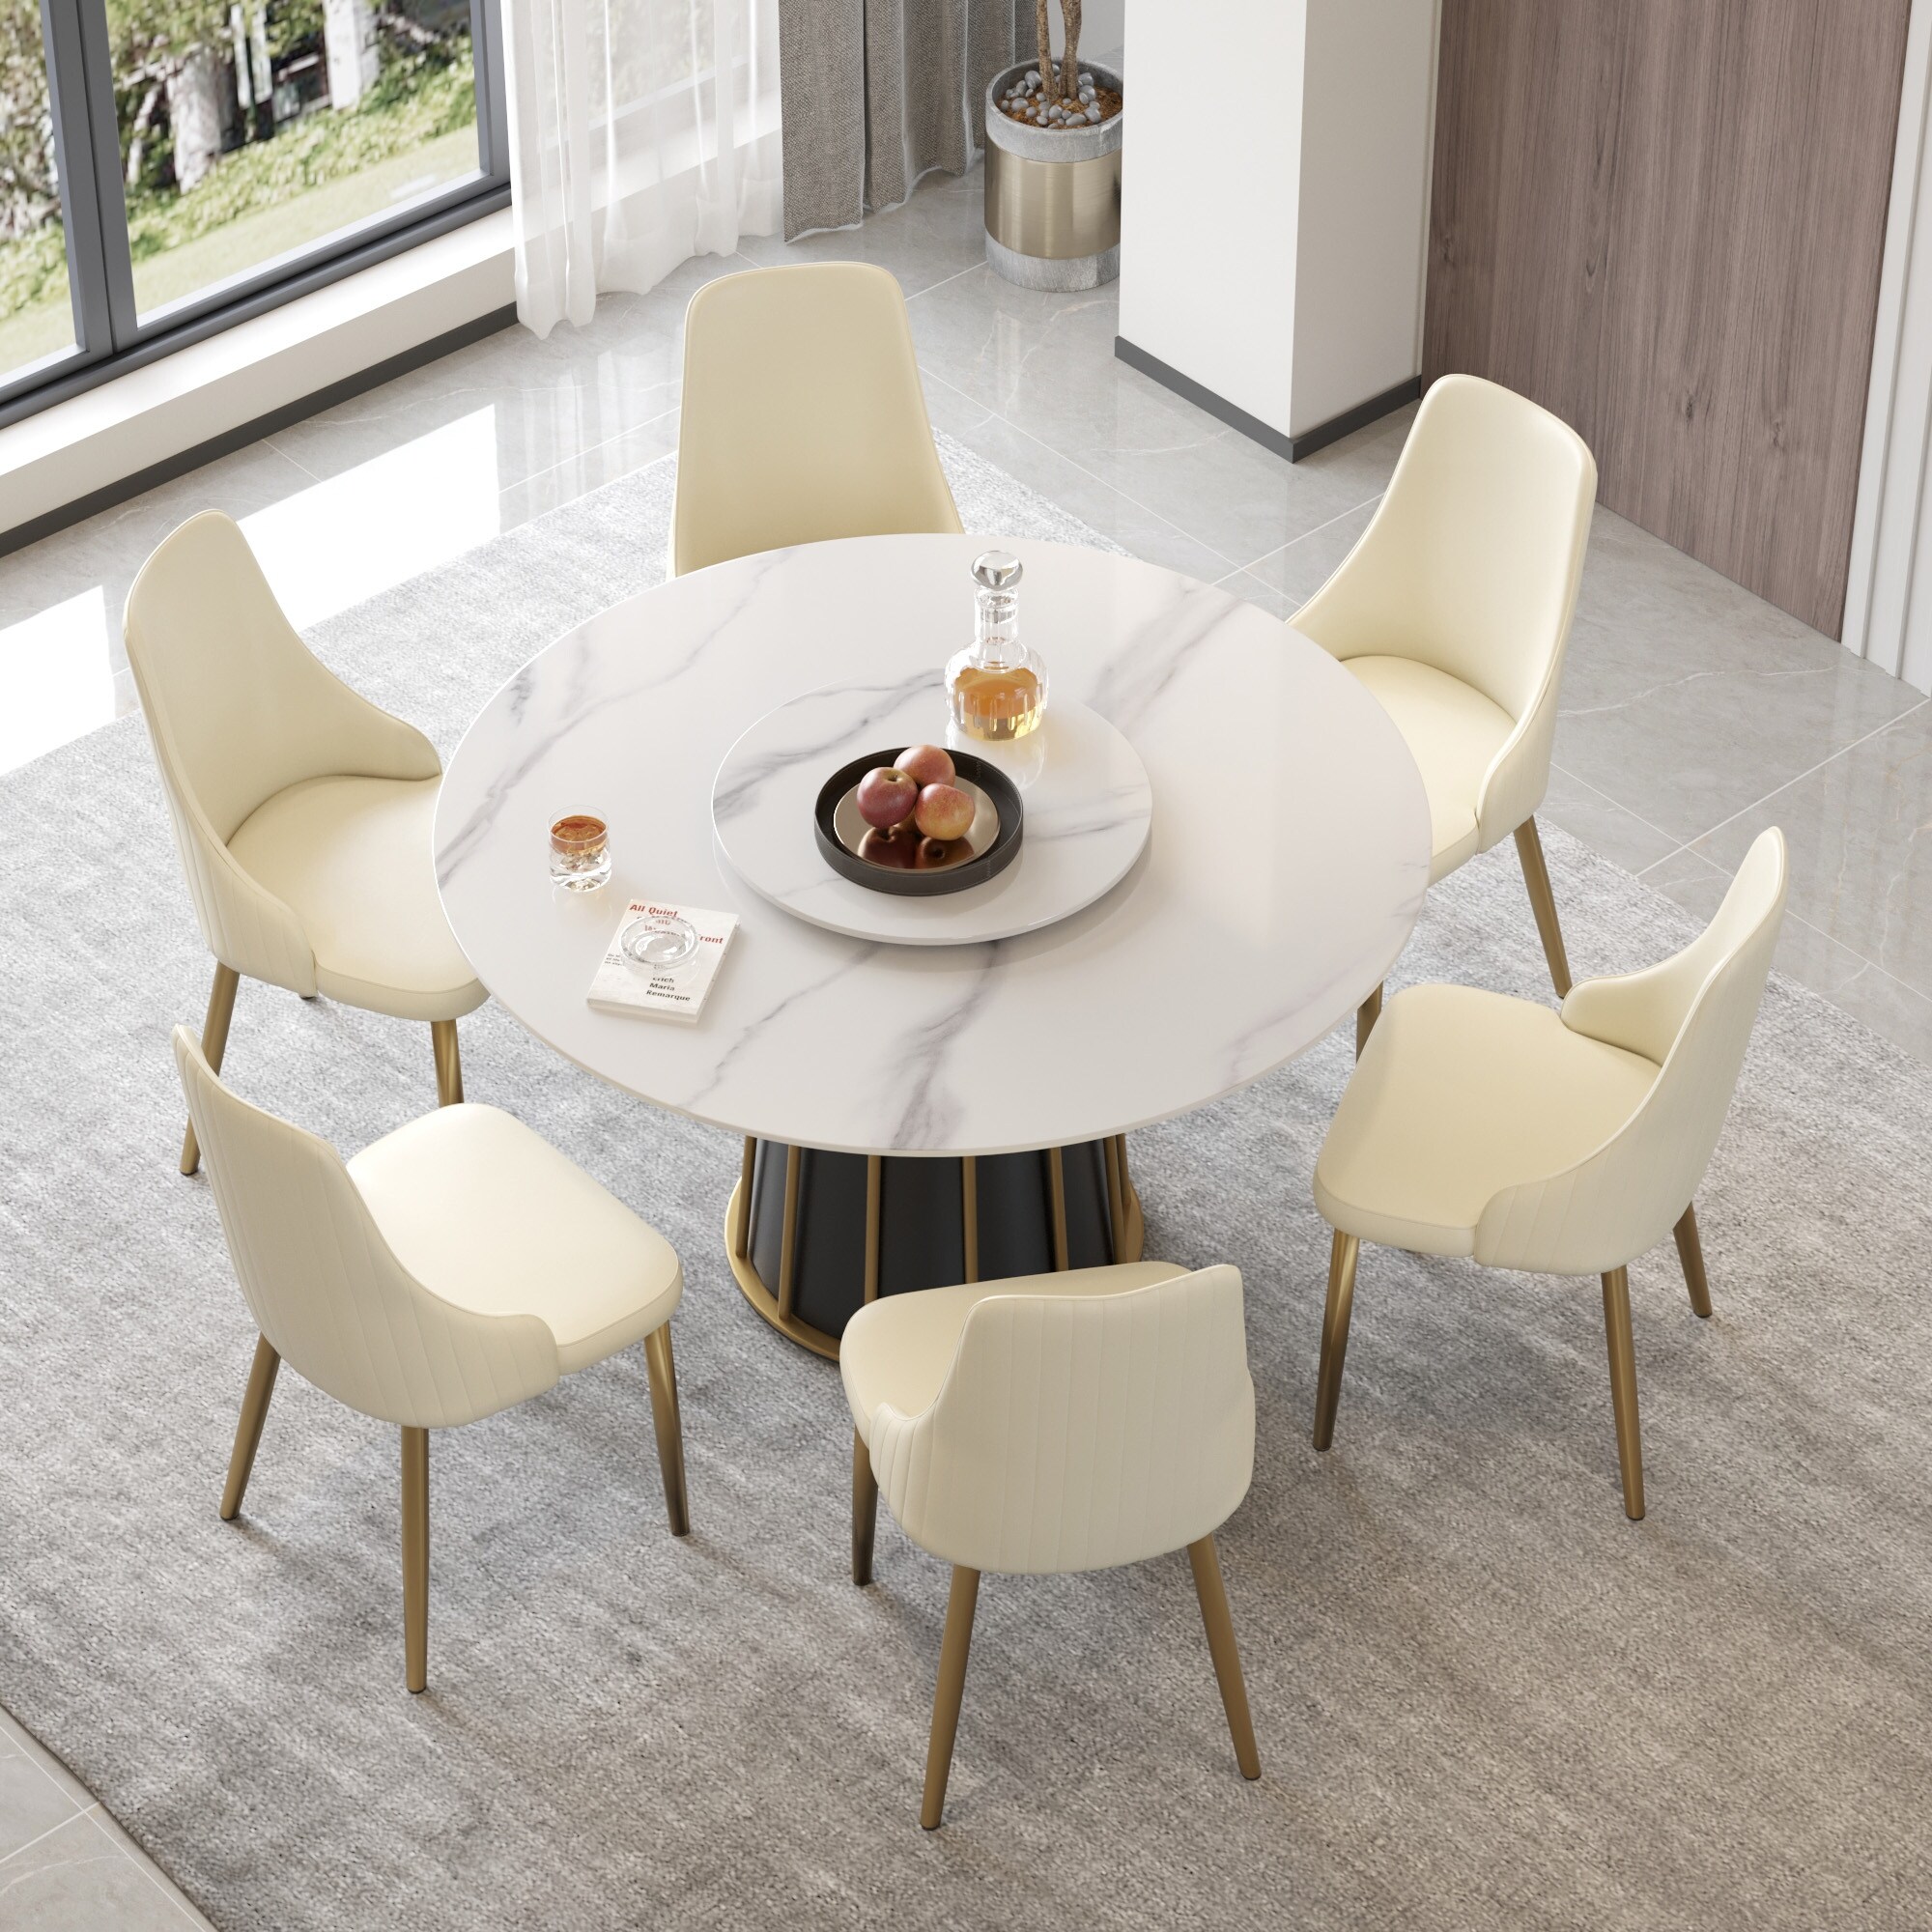 https://ak1.ostkcdn.com/images/products/is/images/direct/87e751bd893cf3976a8d98895c403088748af1ee/Modern-53%22-Round-White-Dining-Table-for-6-Person-Faux-Marble-Top-Gold-%26-Black-Pedestal.jpg